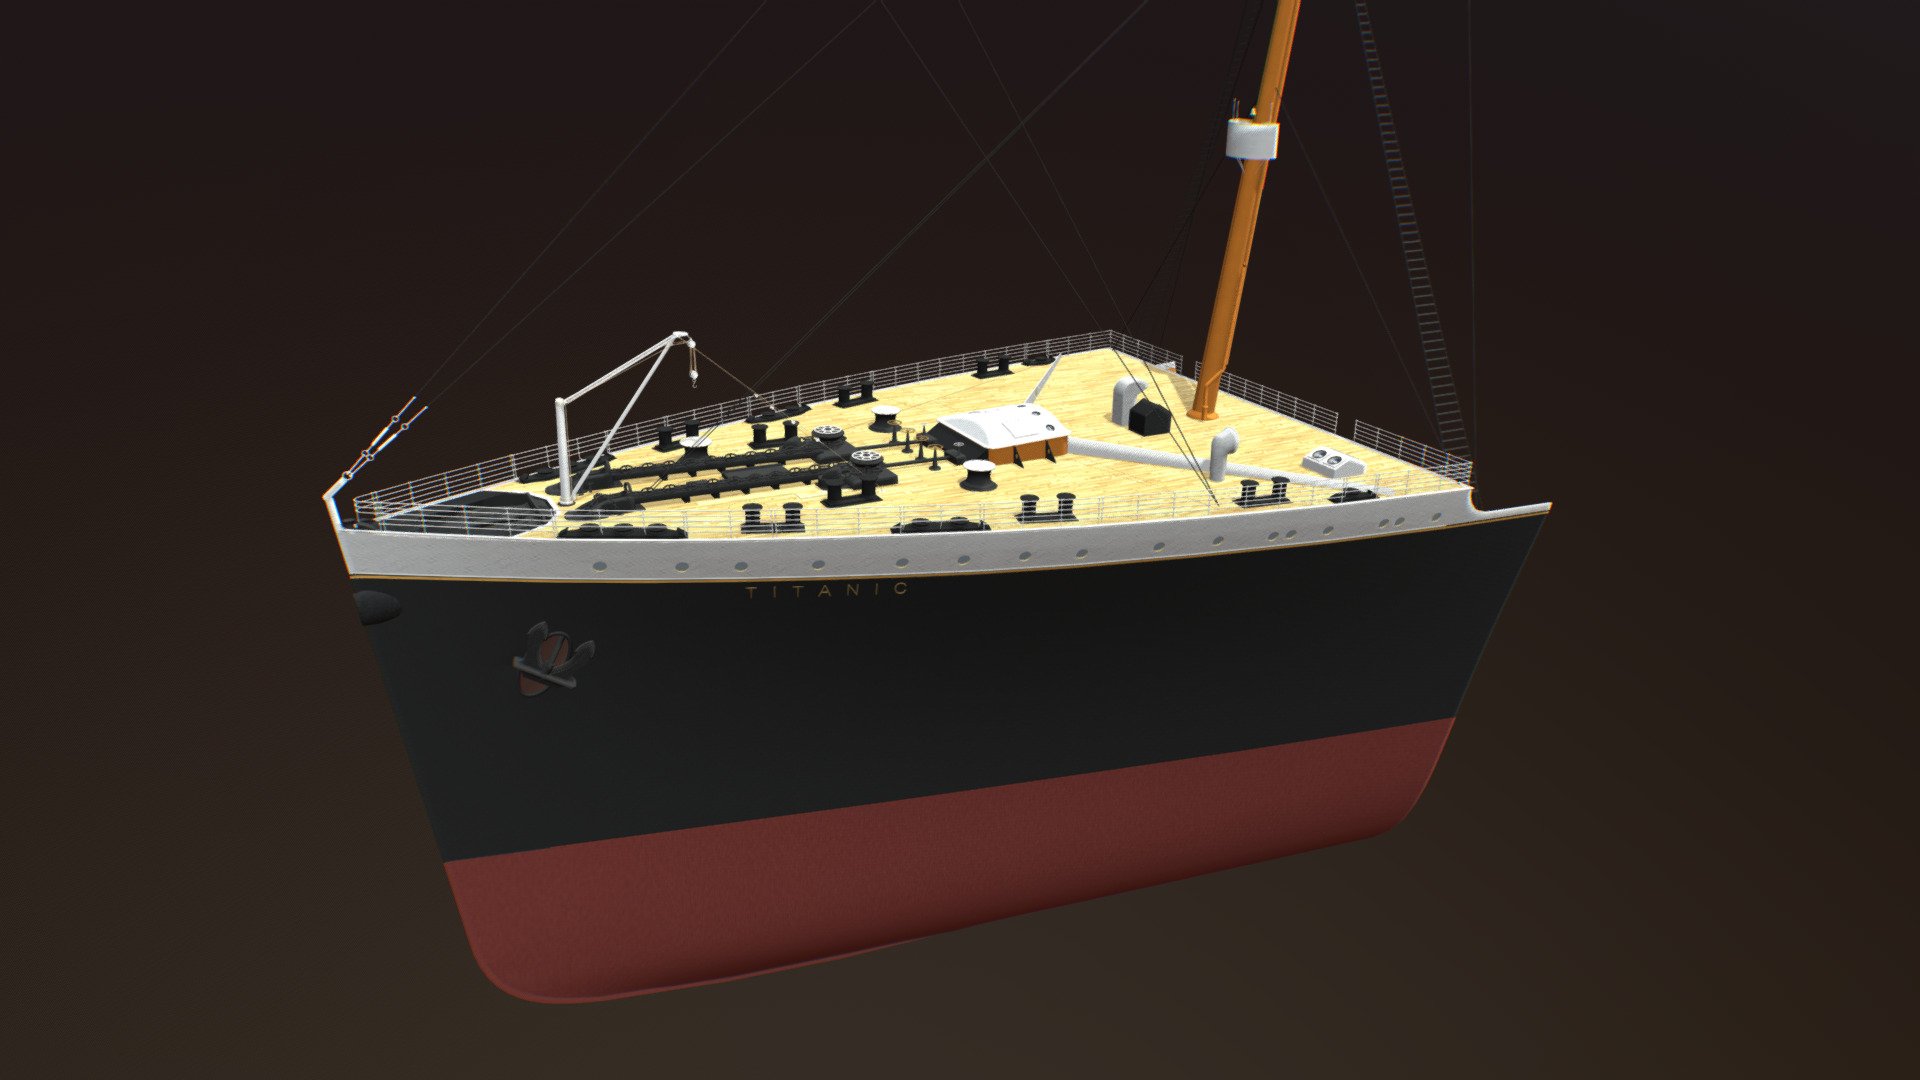 R.M.S. Titanic's bow (forecastle section) 3D model by SattWorx